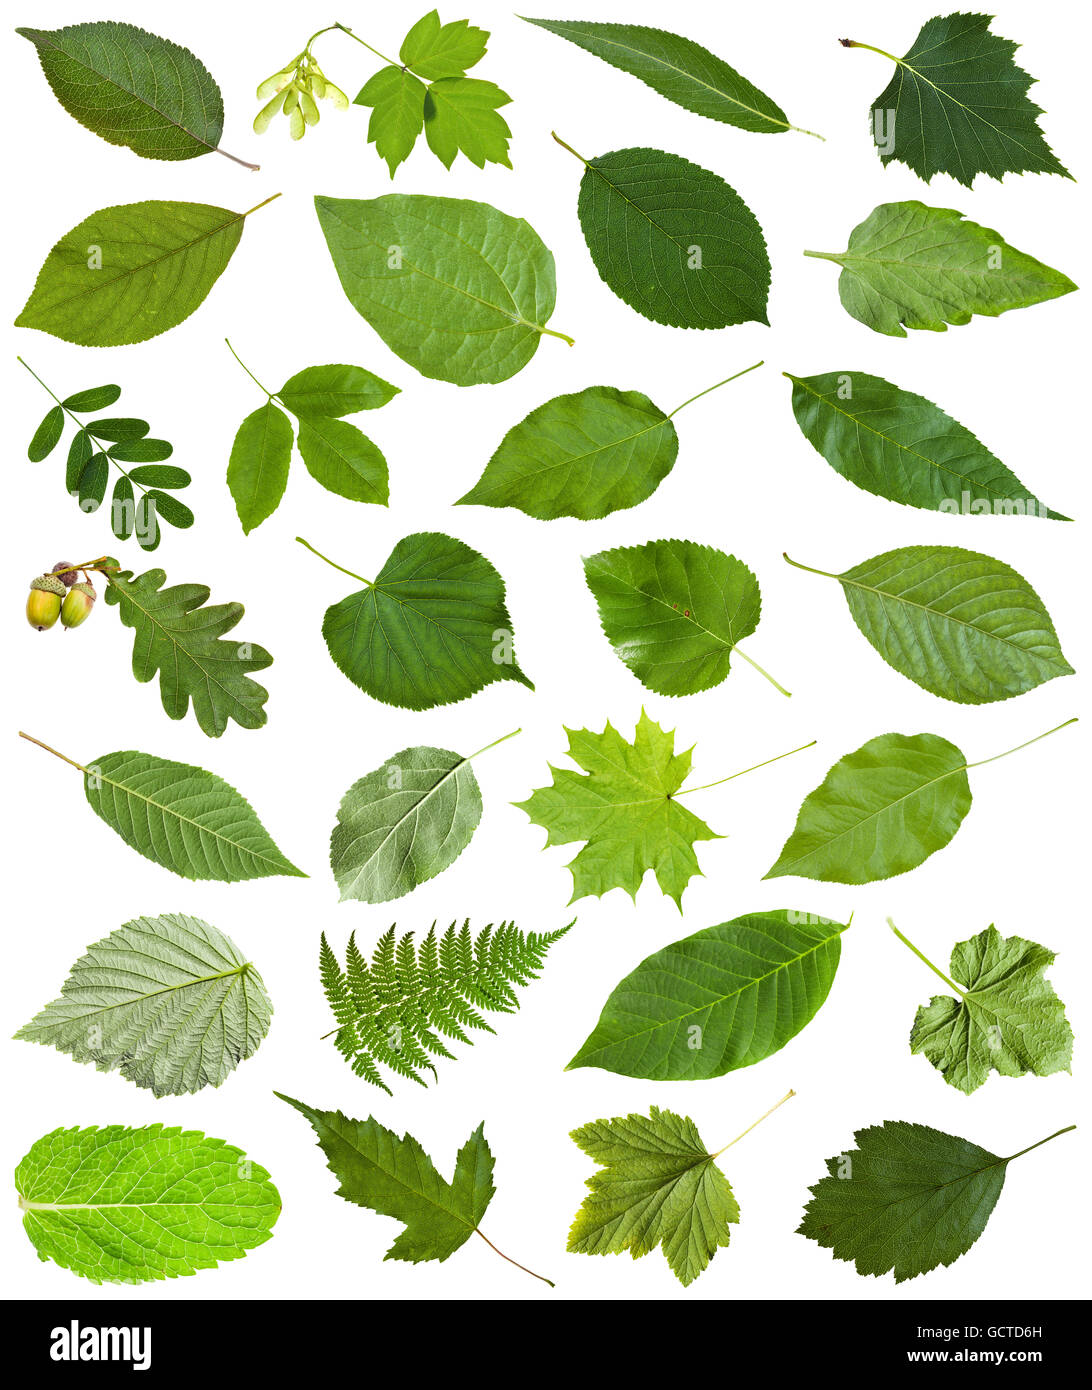 set of varuious green leaves isolated on white - hawberry, maple, acer, sambucus, elderberry, birch, fern, fraxinus, ash, oak, a Stock Photo